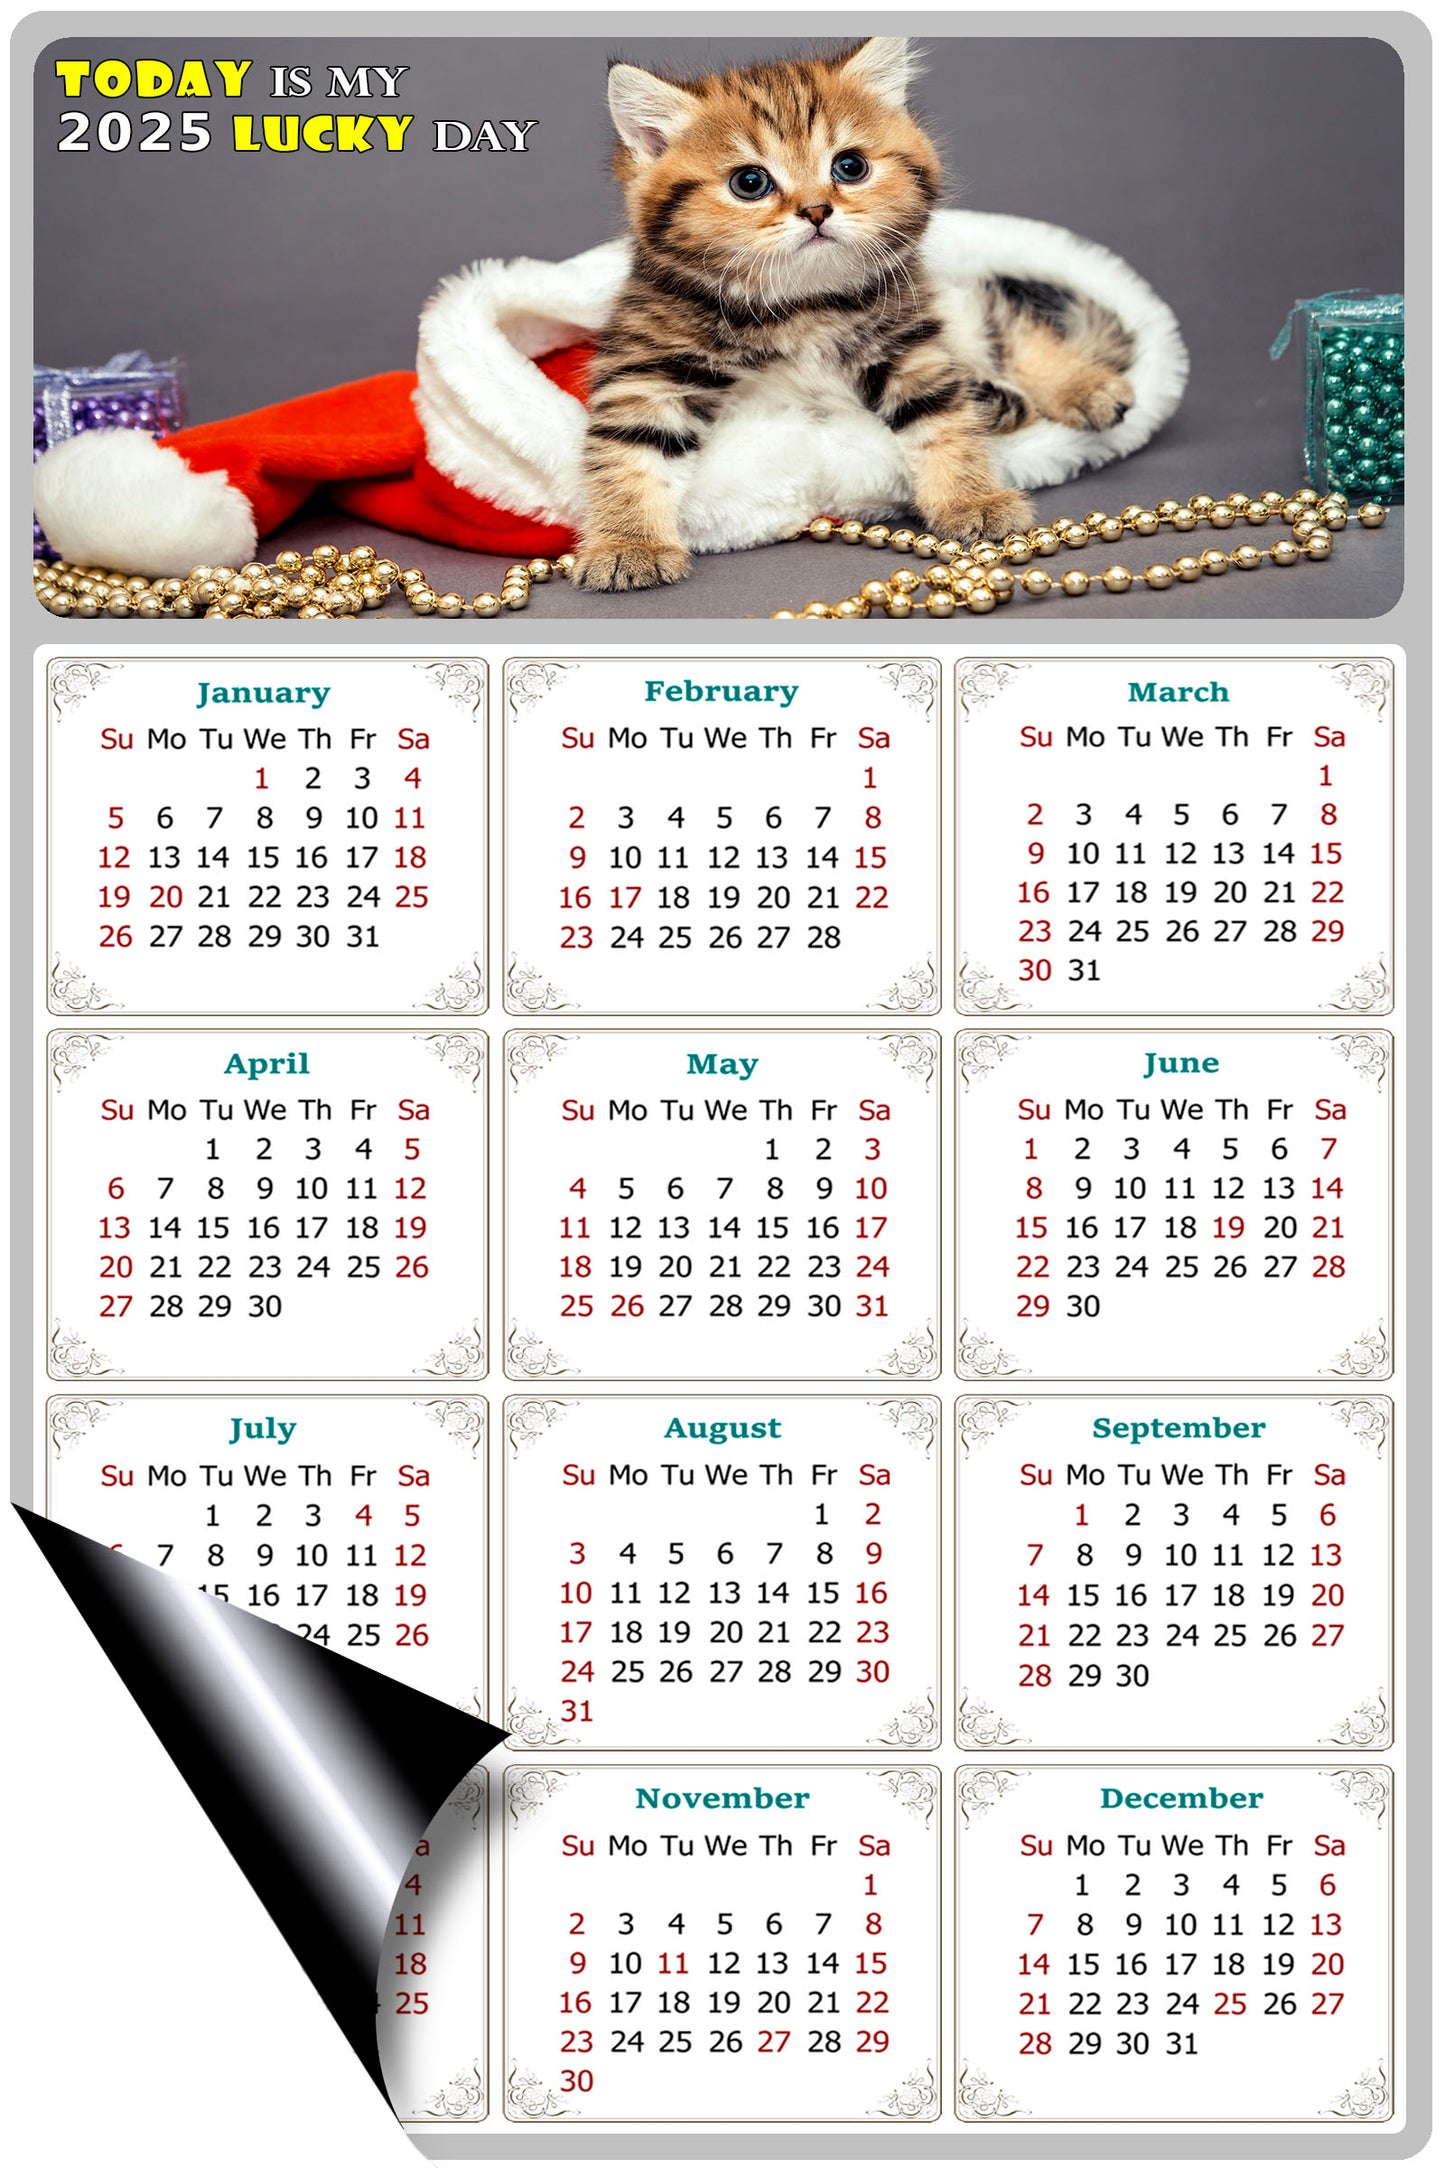 2025 Magnetic Calendar - Today is My Lucky Day (Fade, Tear, and Water Resistant)- Cat Themed 023